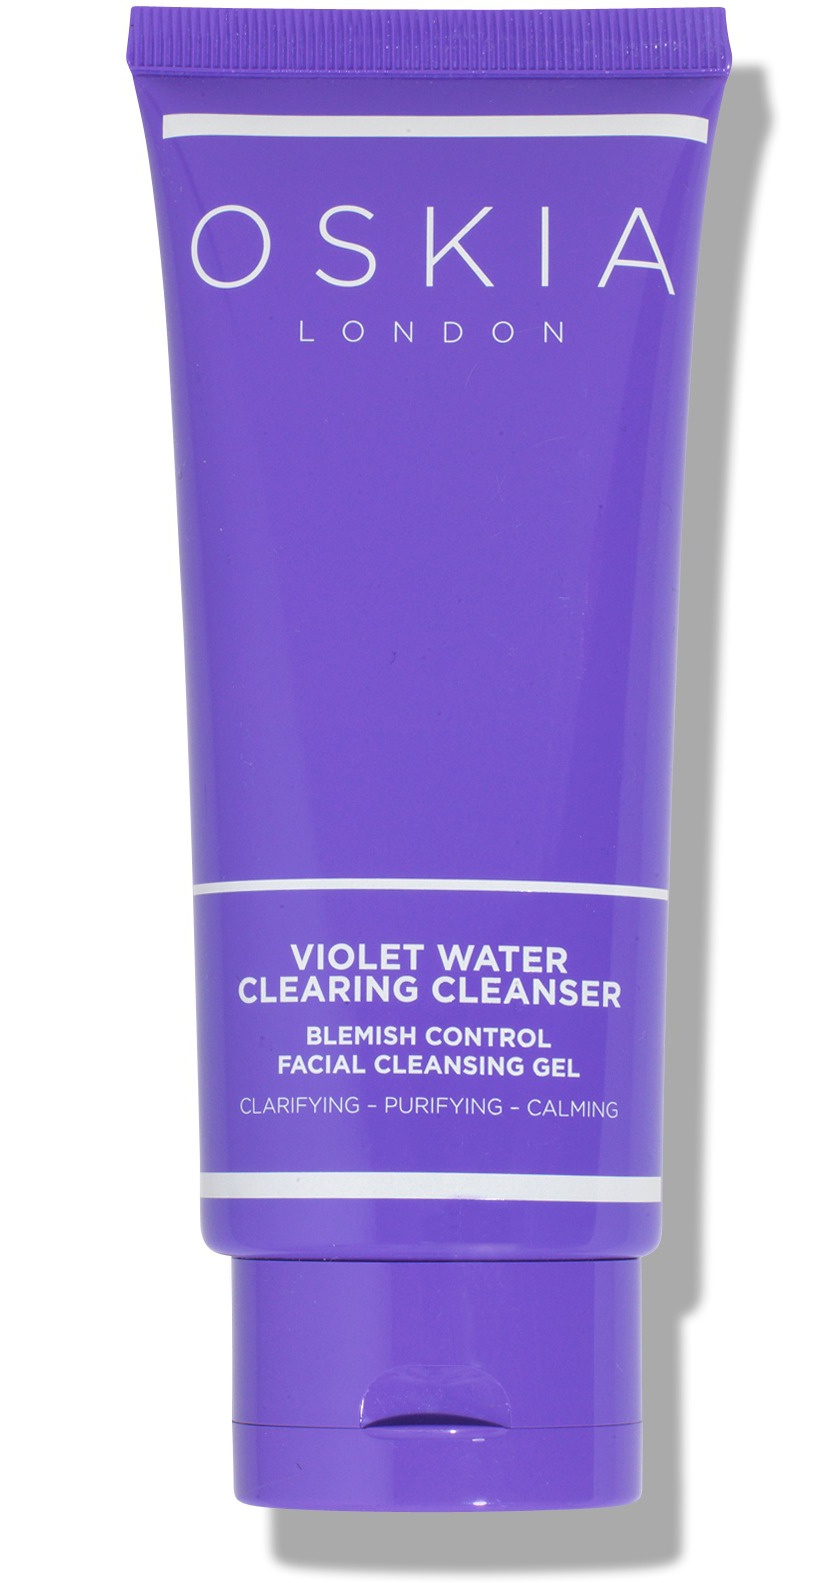 oskia Violet Water Clearing Cleanser